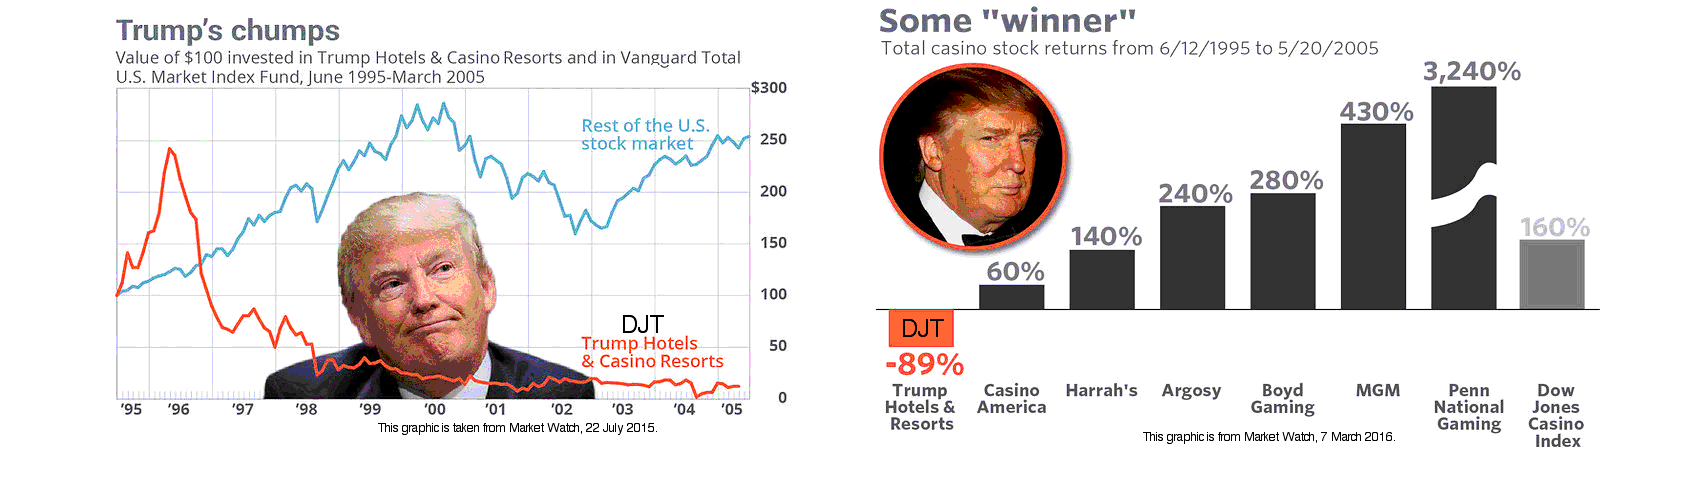 Two plots of DJT stock performance